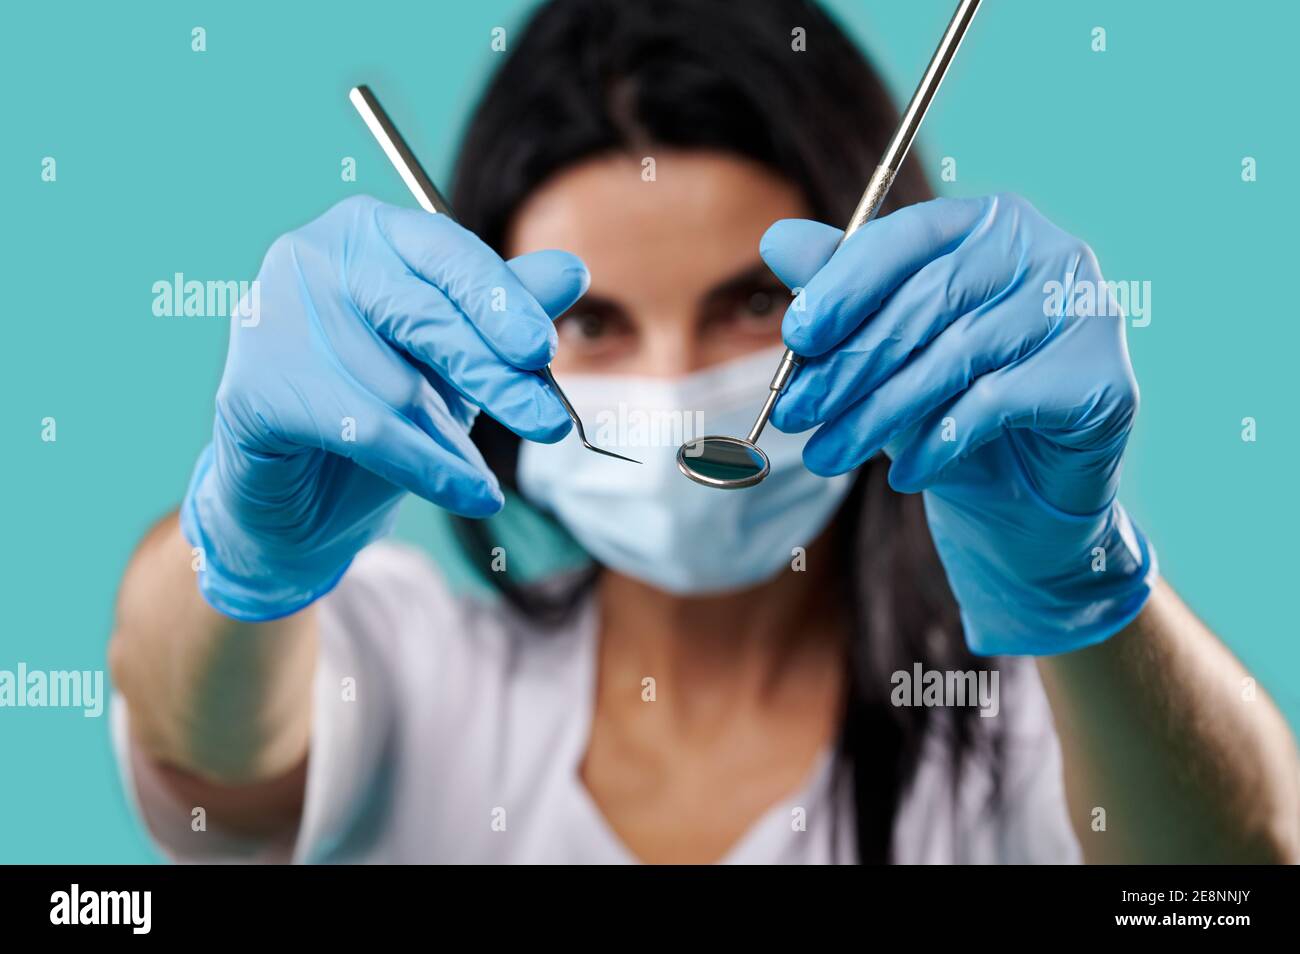 Closeup of dental metal tools in the hands of dentist woman on a blue background Stock Photo